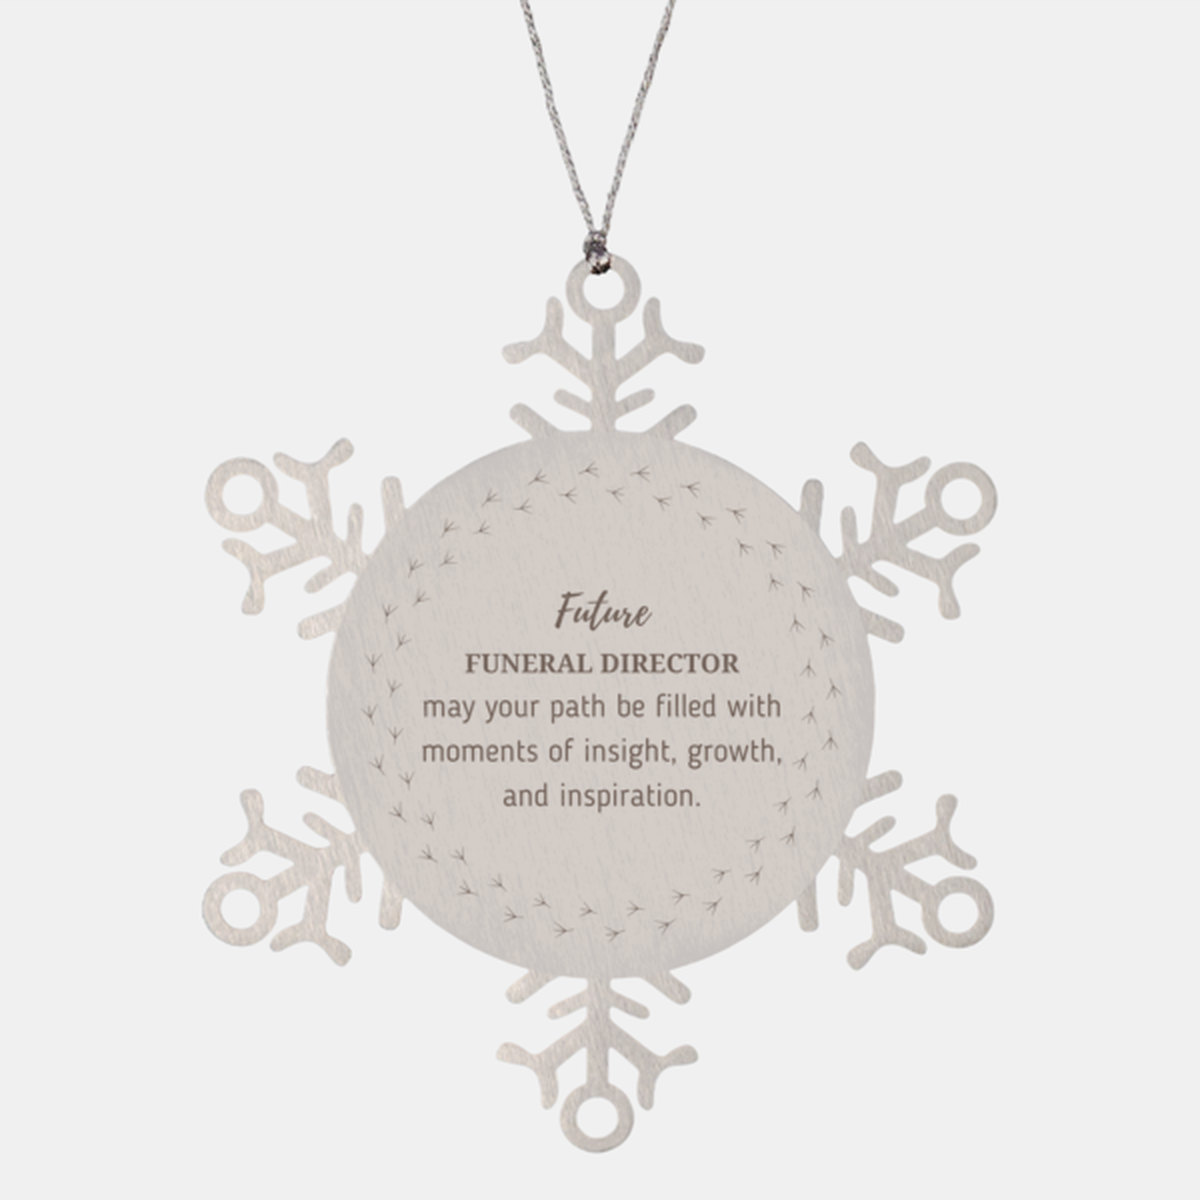 Future Funeral Director Gifts, May your path be filled with moments of insight, Graduation Gifts for New Funeral Director, Christmas Unique Snowflake Ornament For Men, Women, Friends